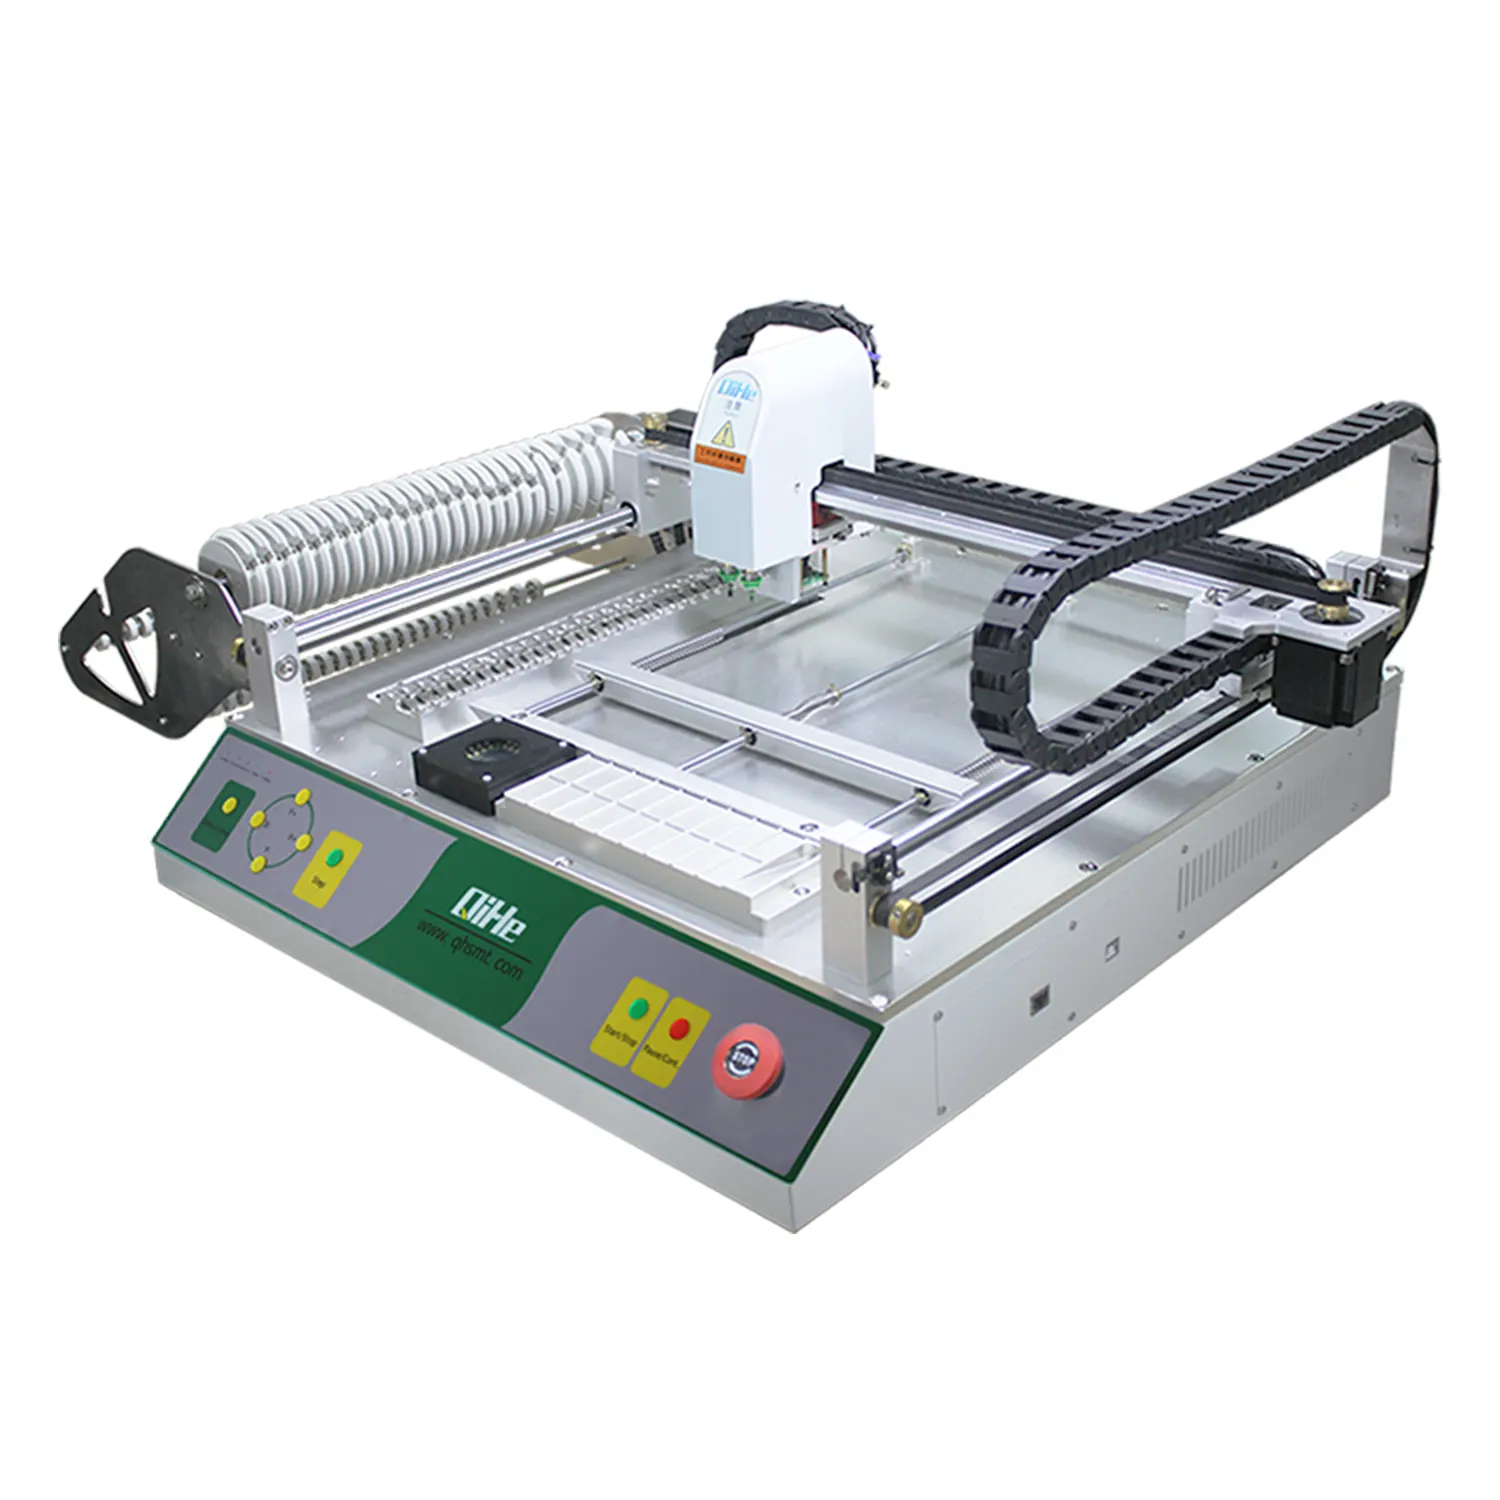 Small Automatic TVM802A With 29 Feeders Production Line For Led Lamps SMT/Desktop Pick and Place Machine Solder Paste Printer